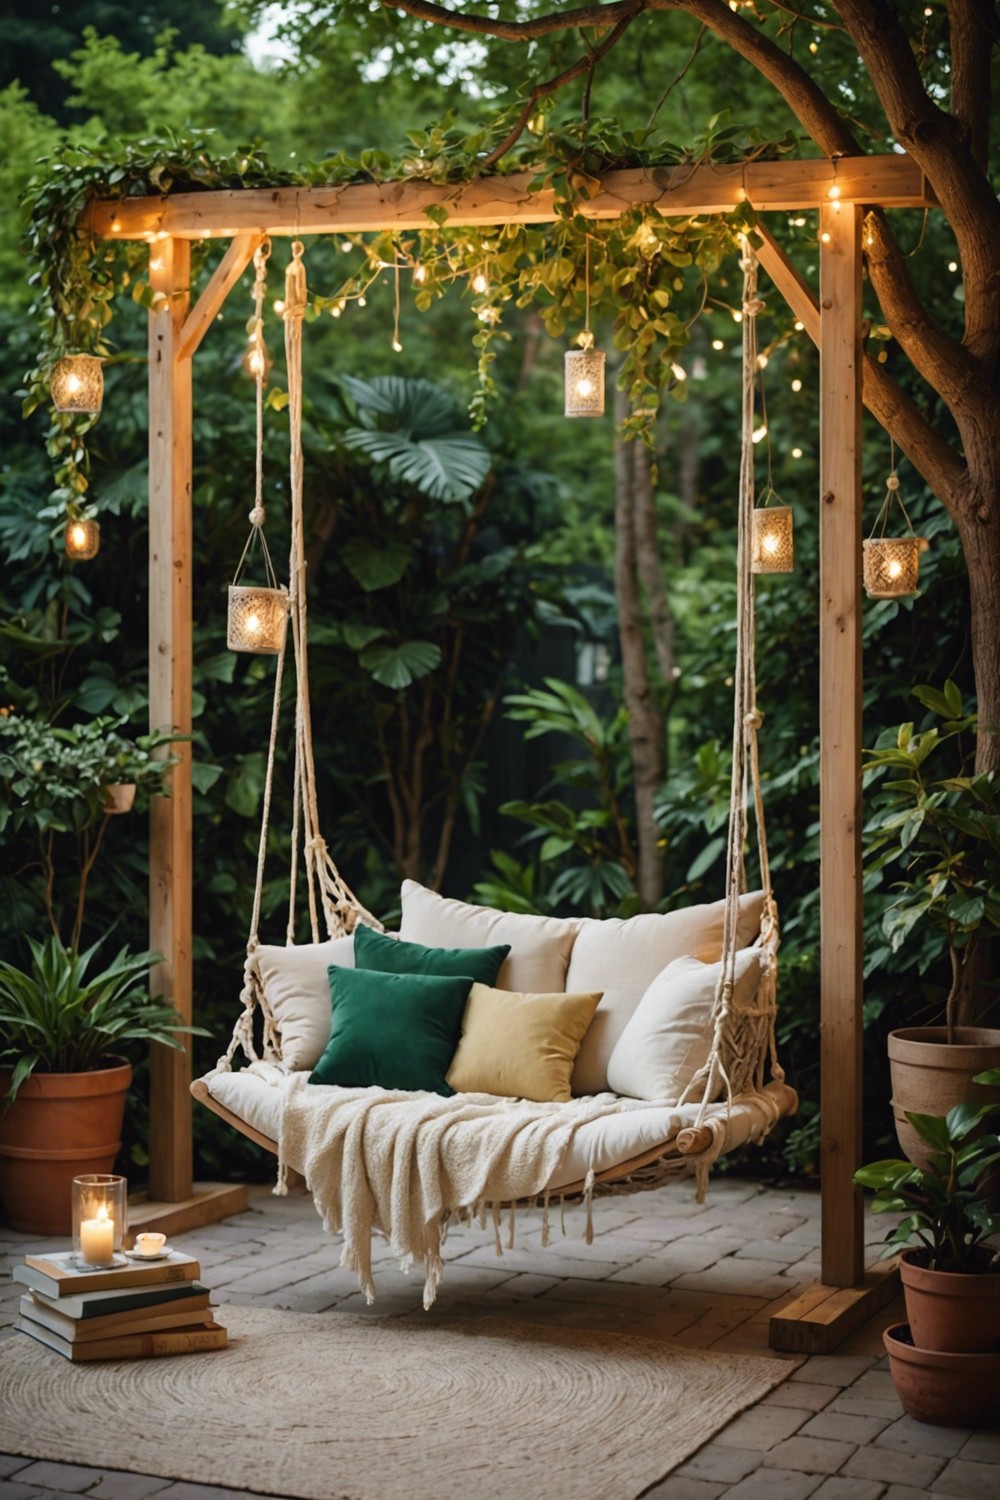 Cozy Reading Nook with a Swing